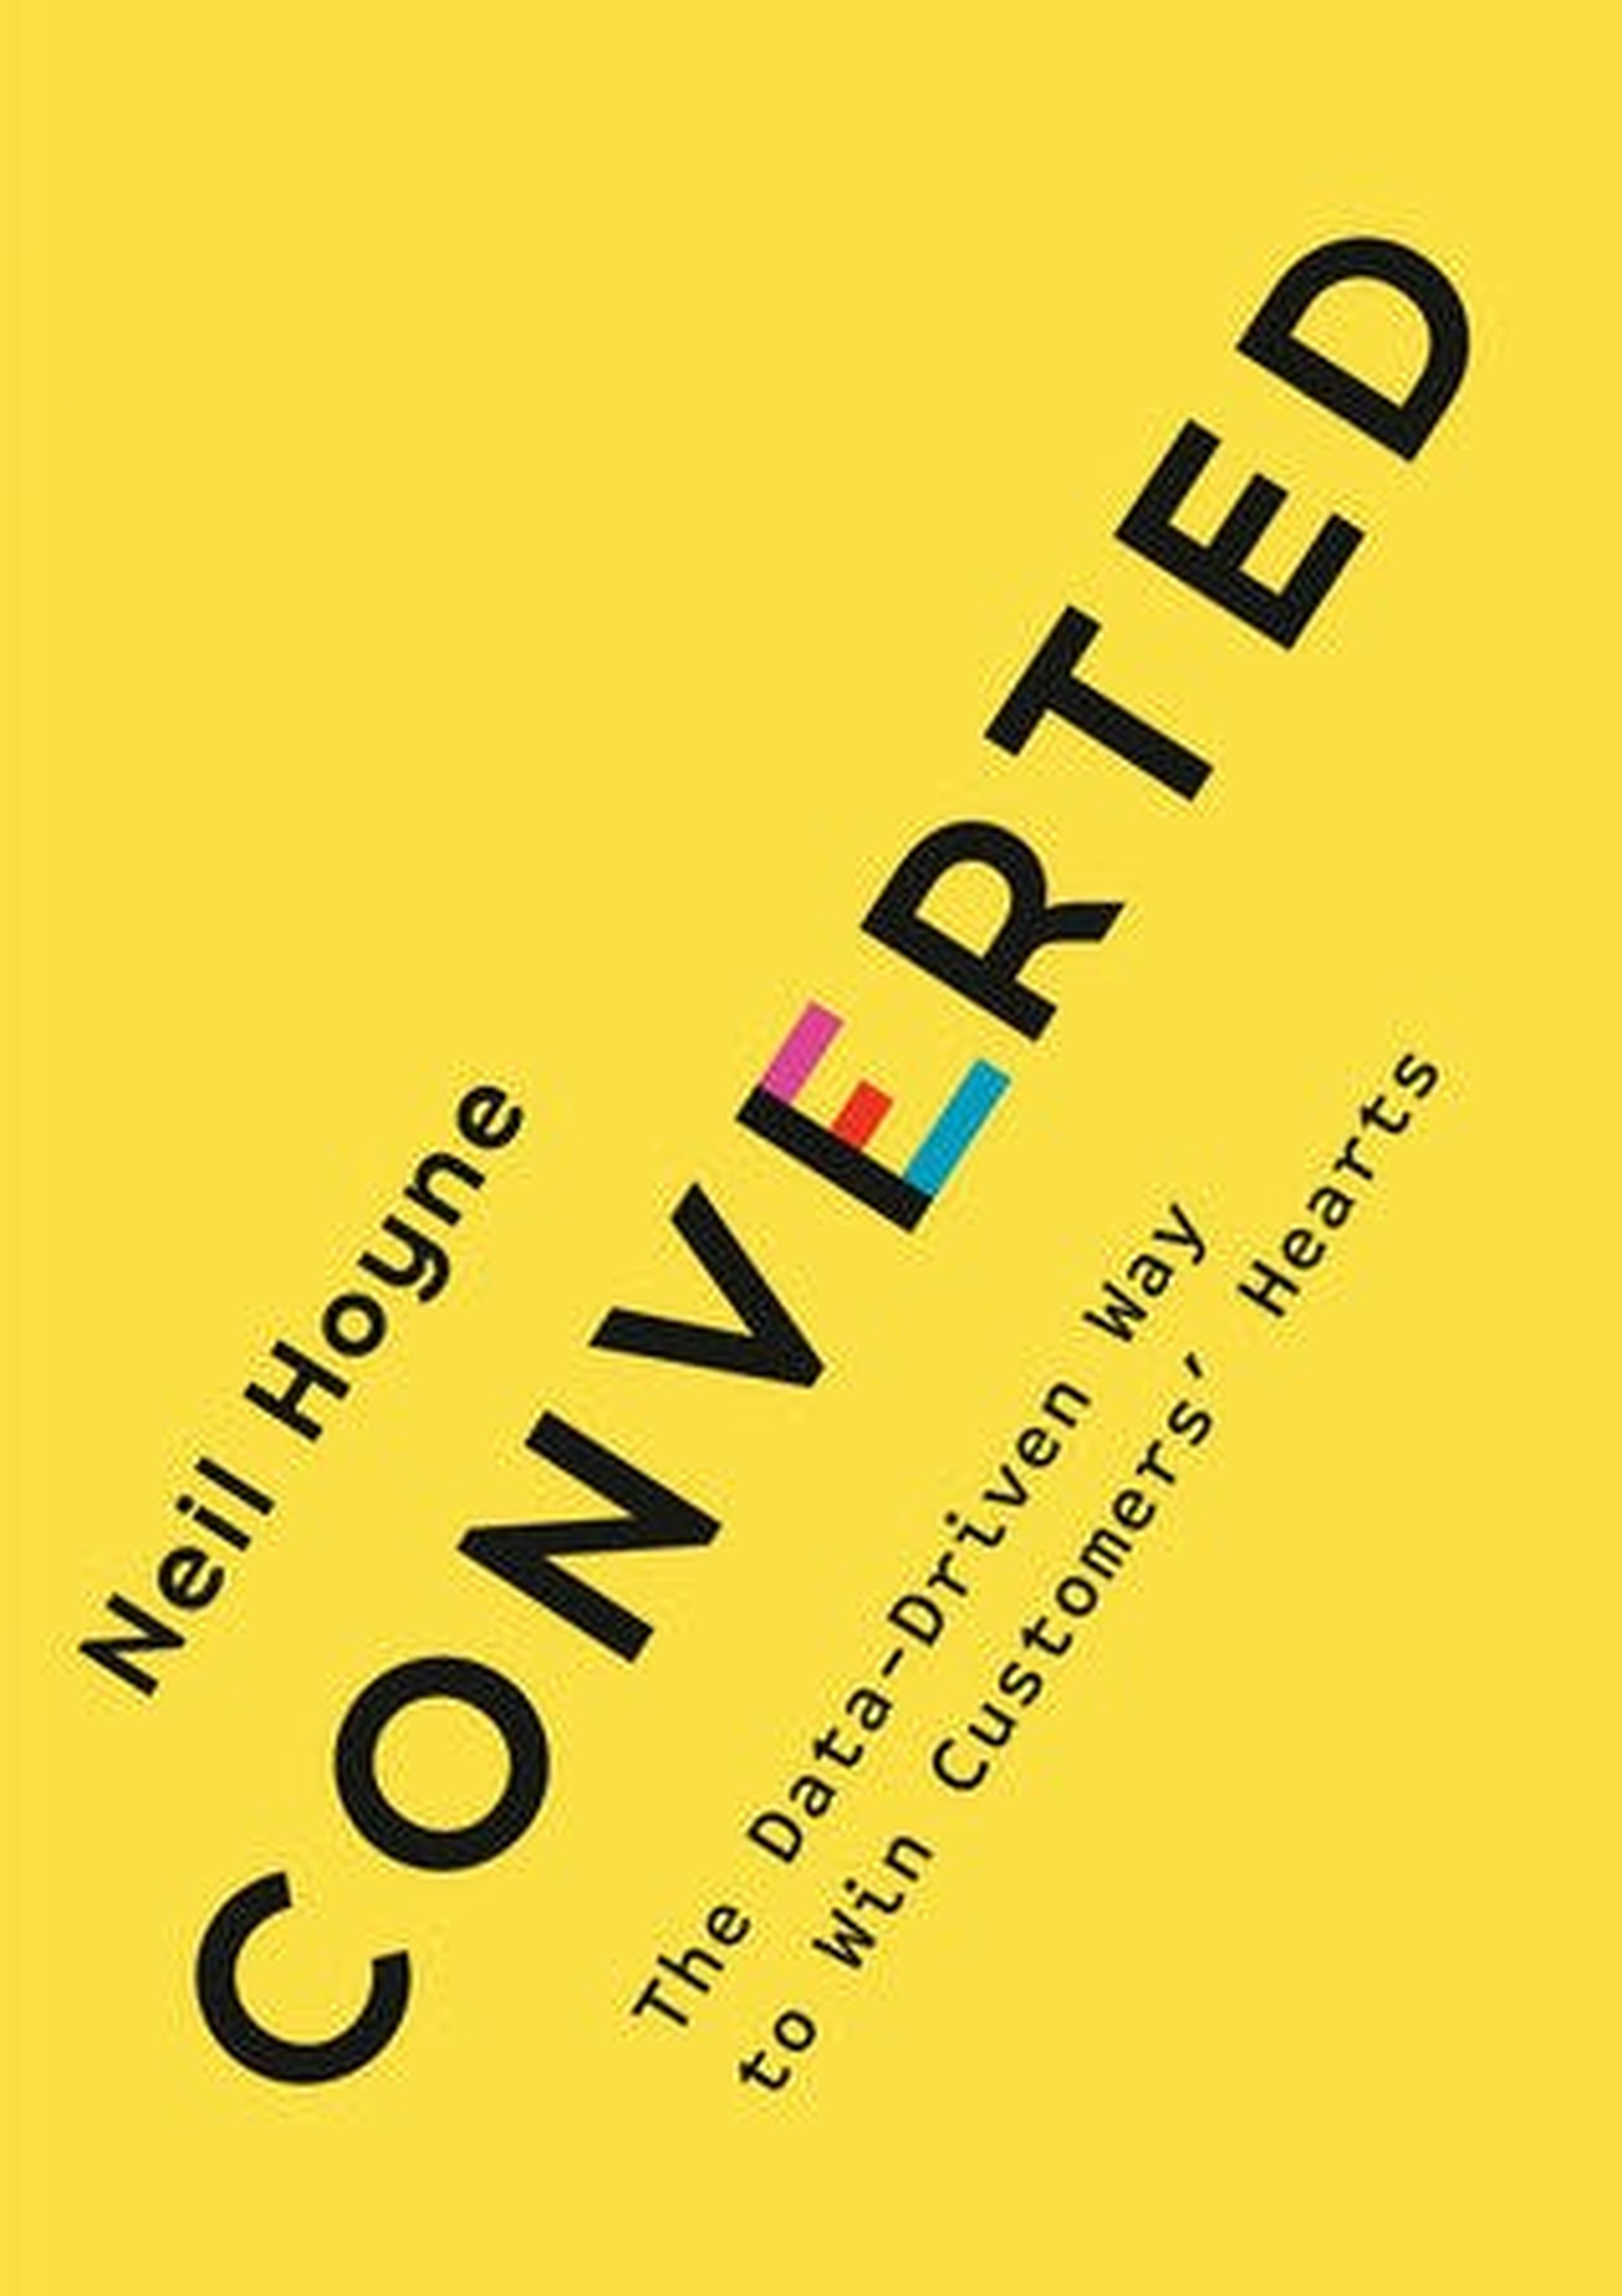 'Converted: The Data-Driven Way to Win Customers' Hearts'